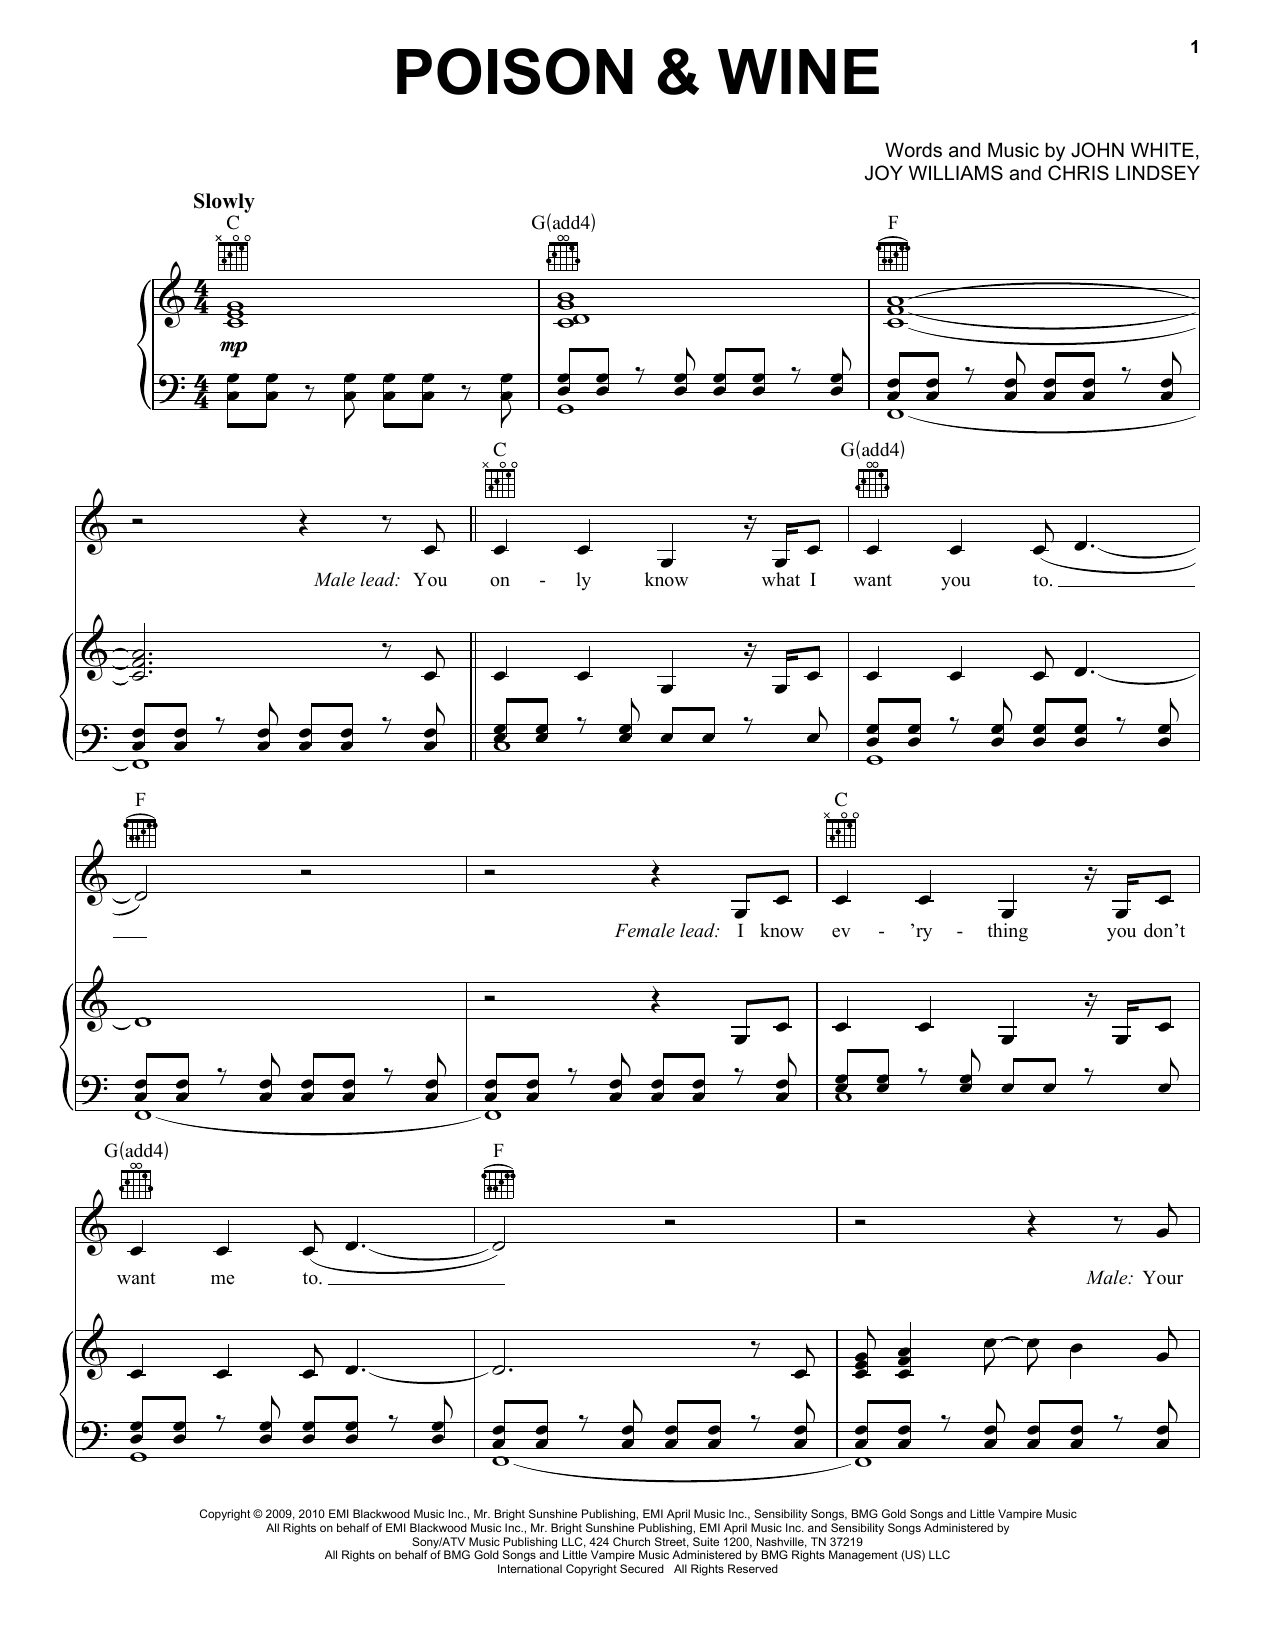 Download The Civil Wars Poison and Wine Sheet Music